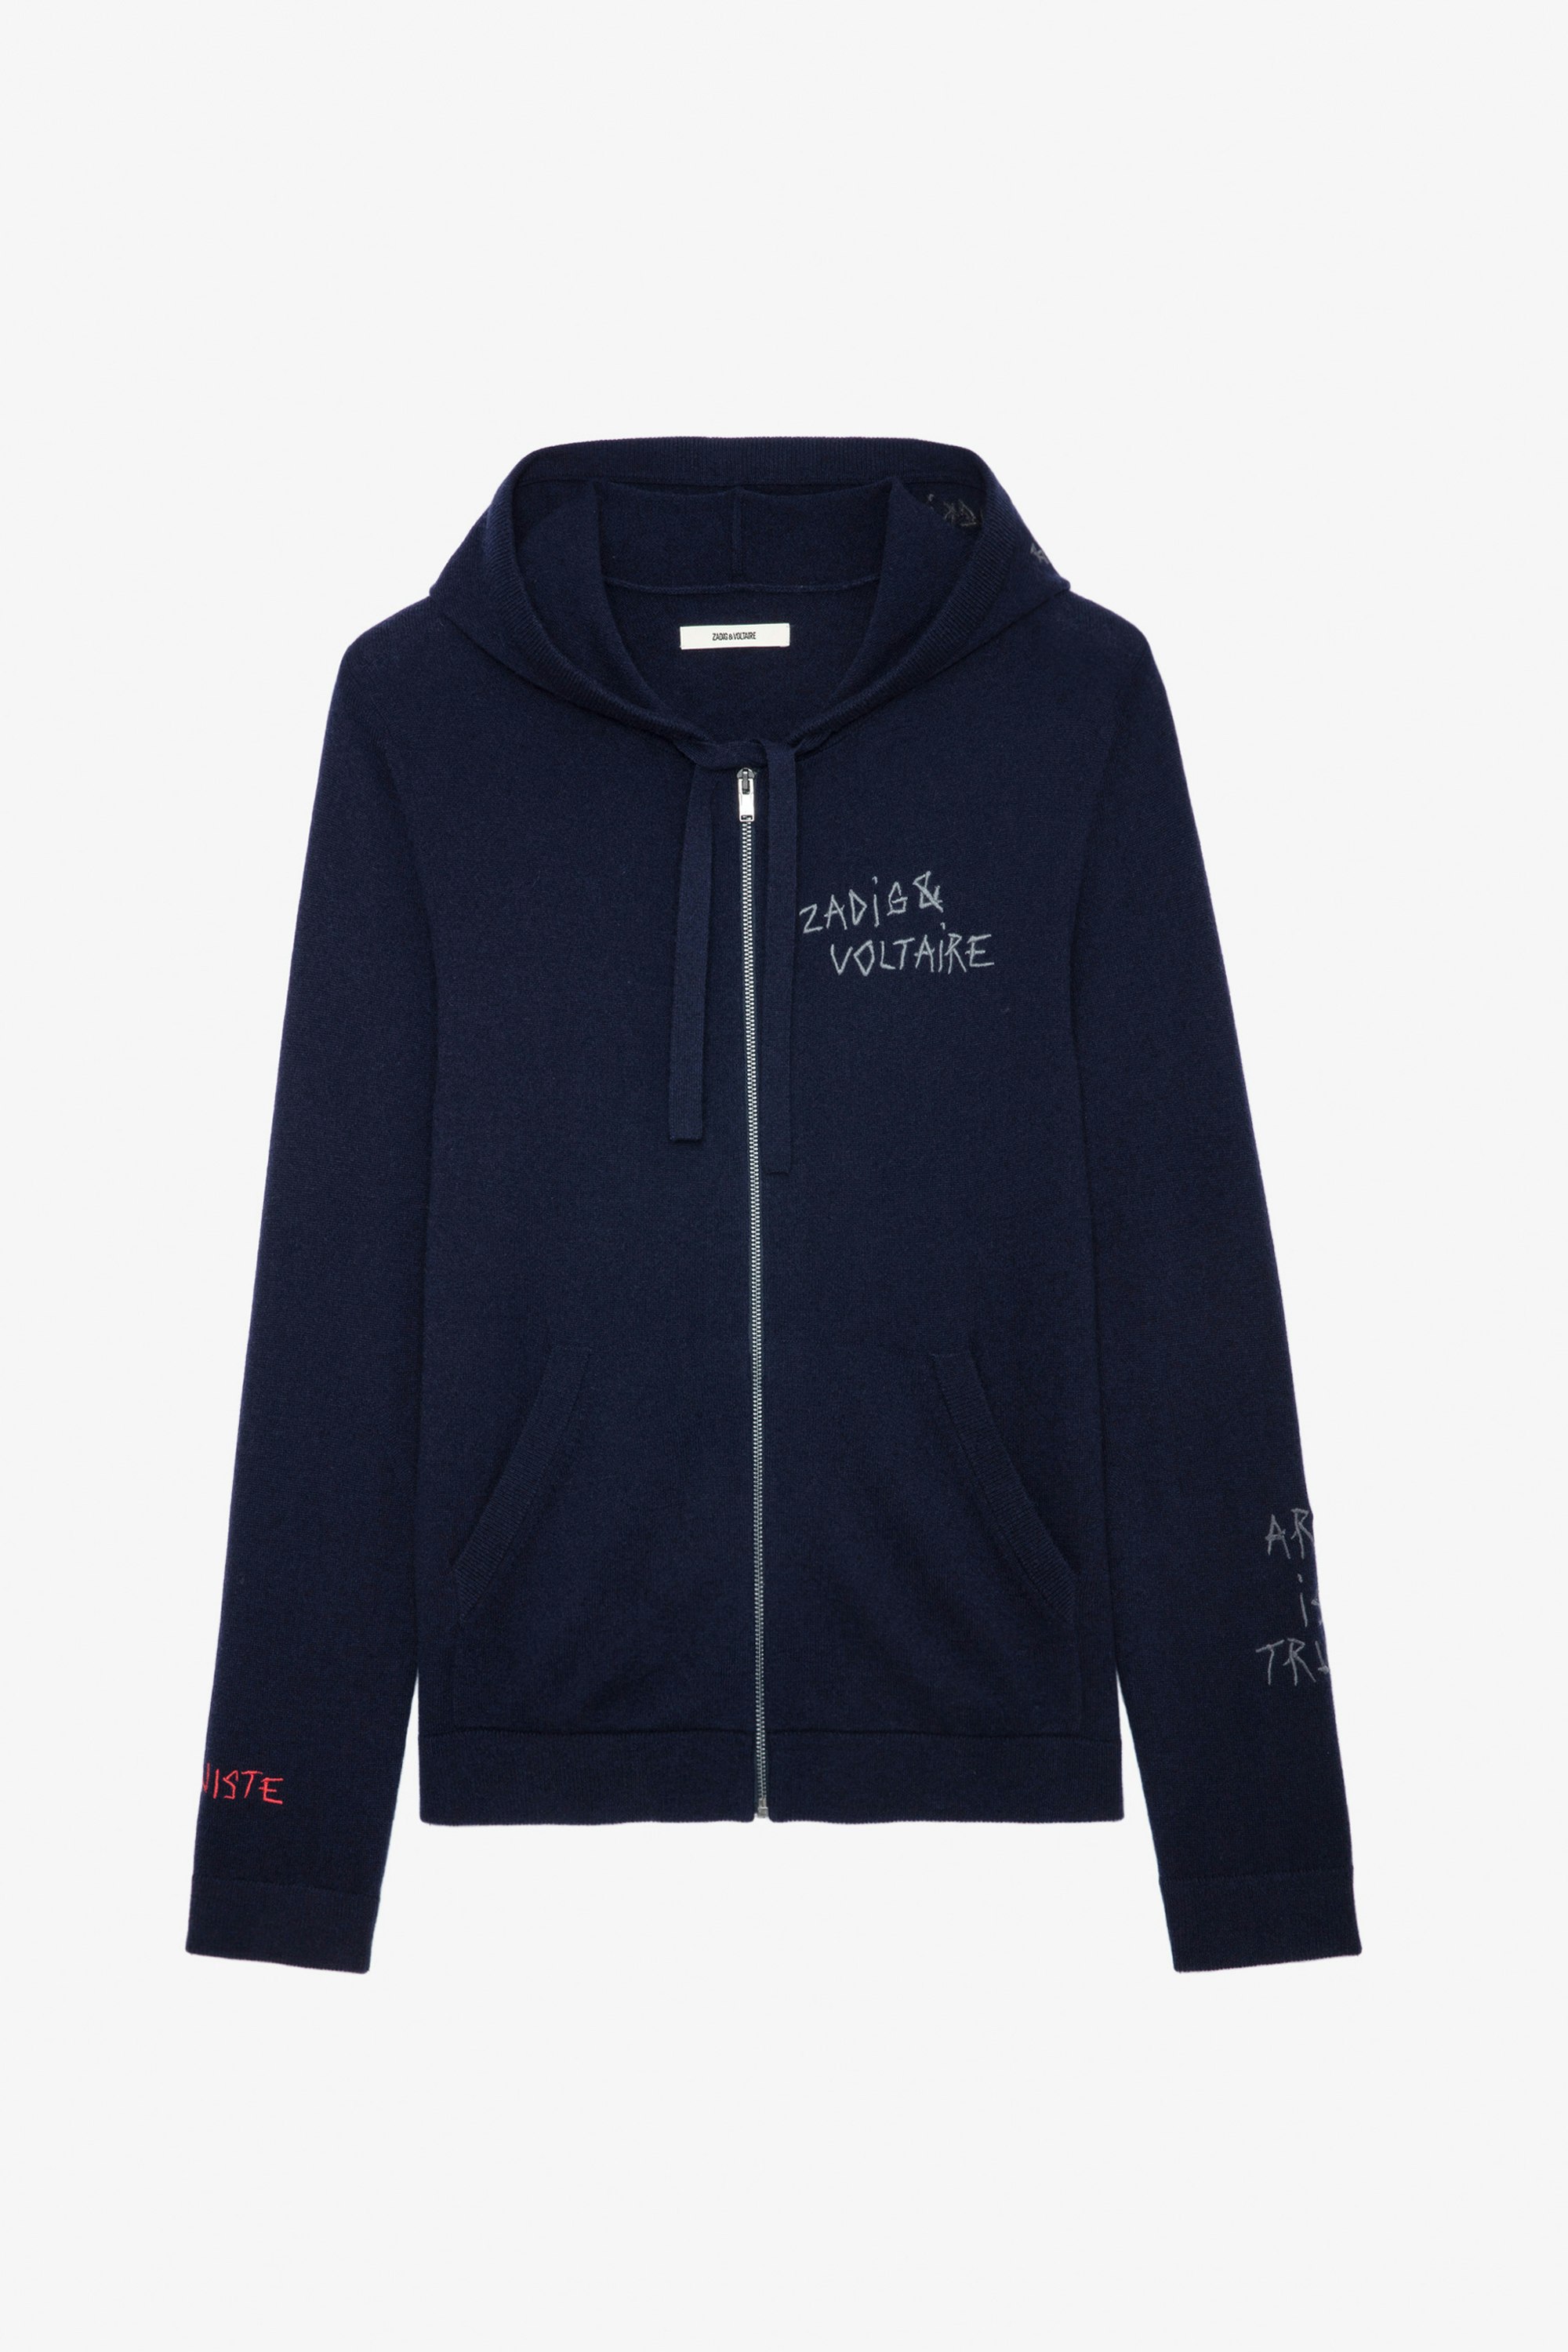 Clash Cardigan - Men’s navy blue grey knit hooded zip-up cardigan with slogans and arrows.